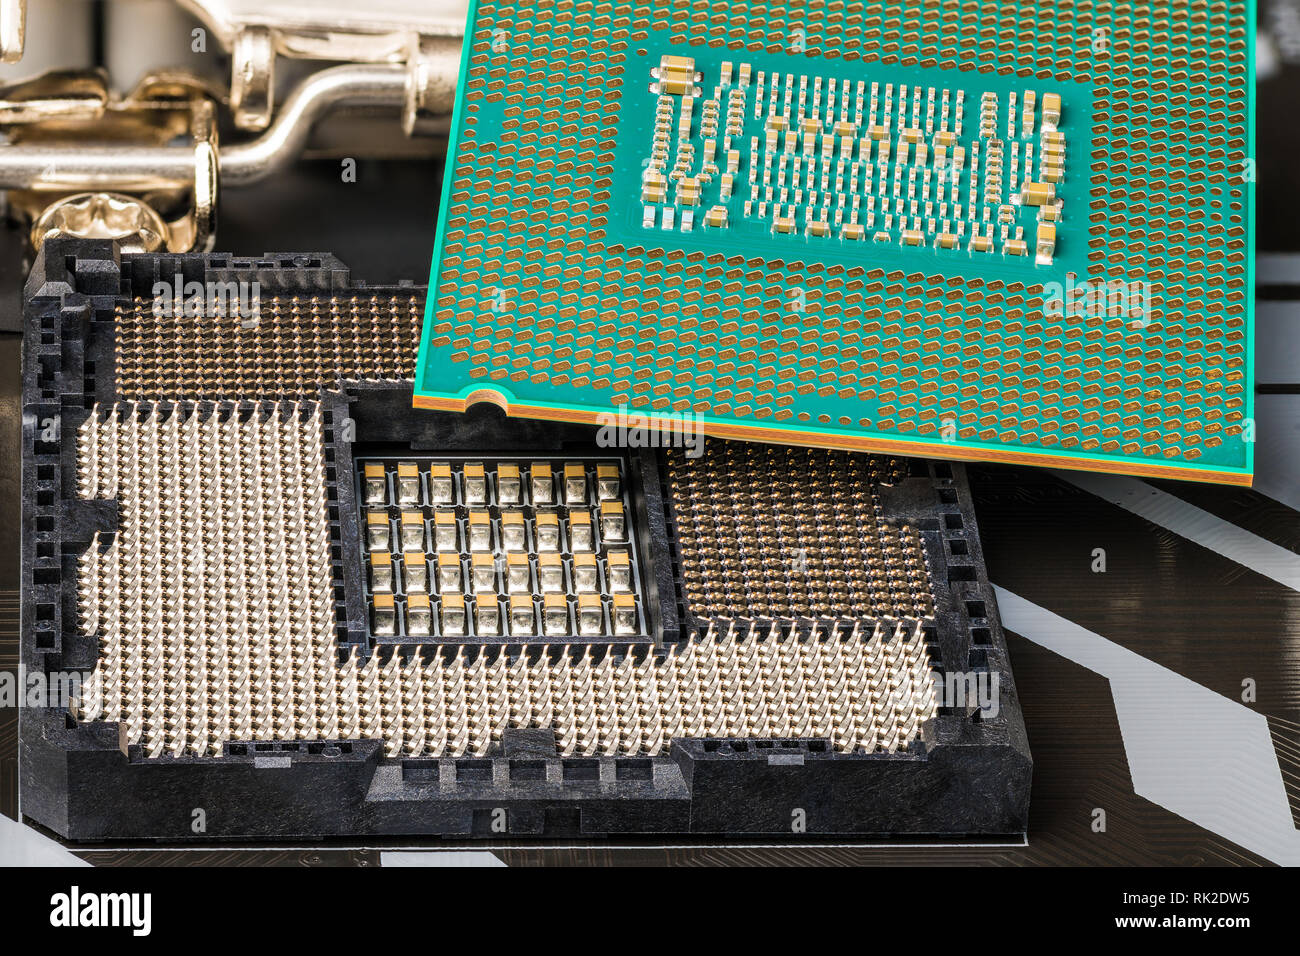 Installation of processor into socket on computer mainboard. Close-up of central processing unit. Replacement of hardware components. Microchip detail. Stock Photo